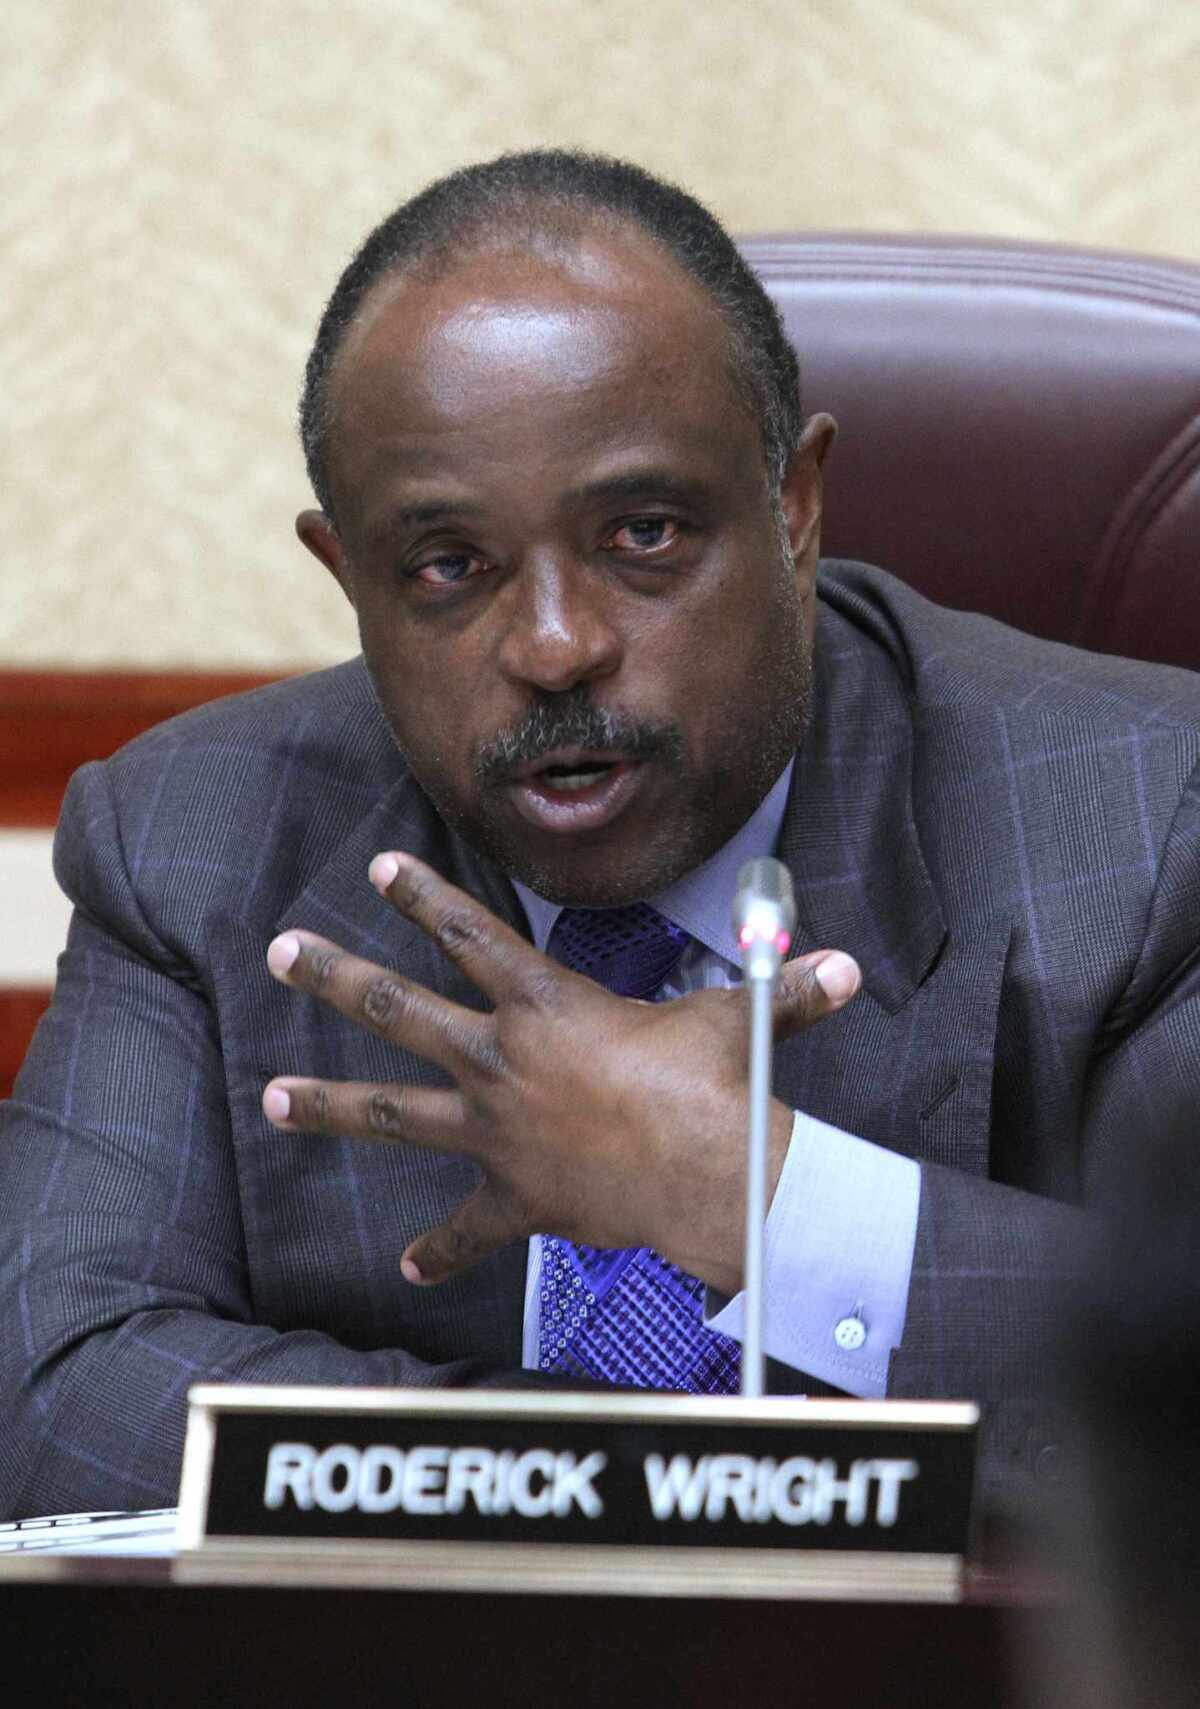 State Sen. Rod Wright (D-Inglewood) has pleaded not guilty to charges of perjury and voter fraud.